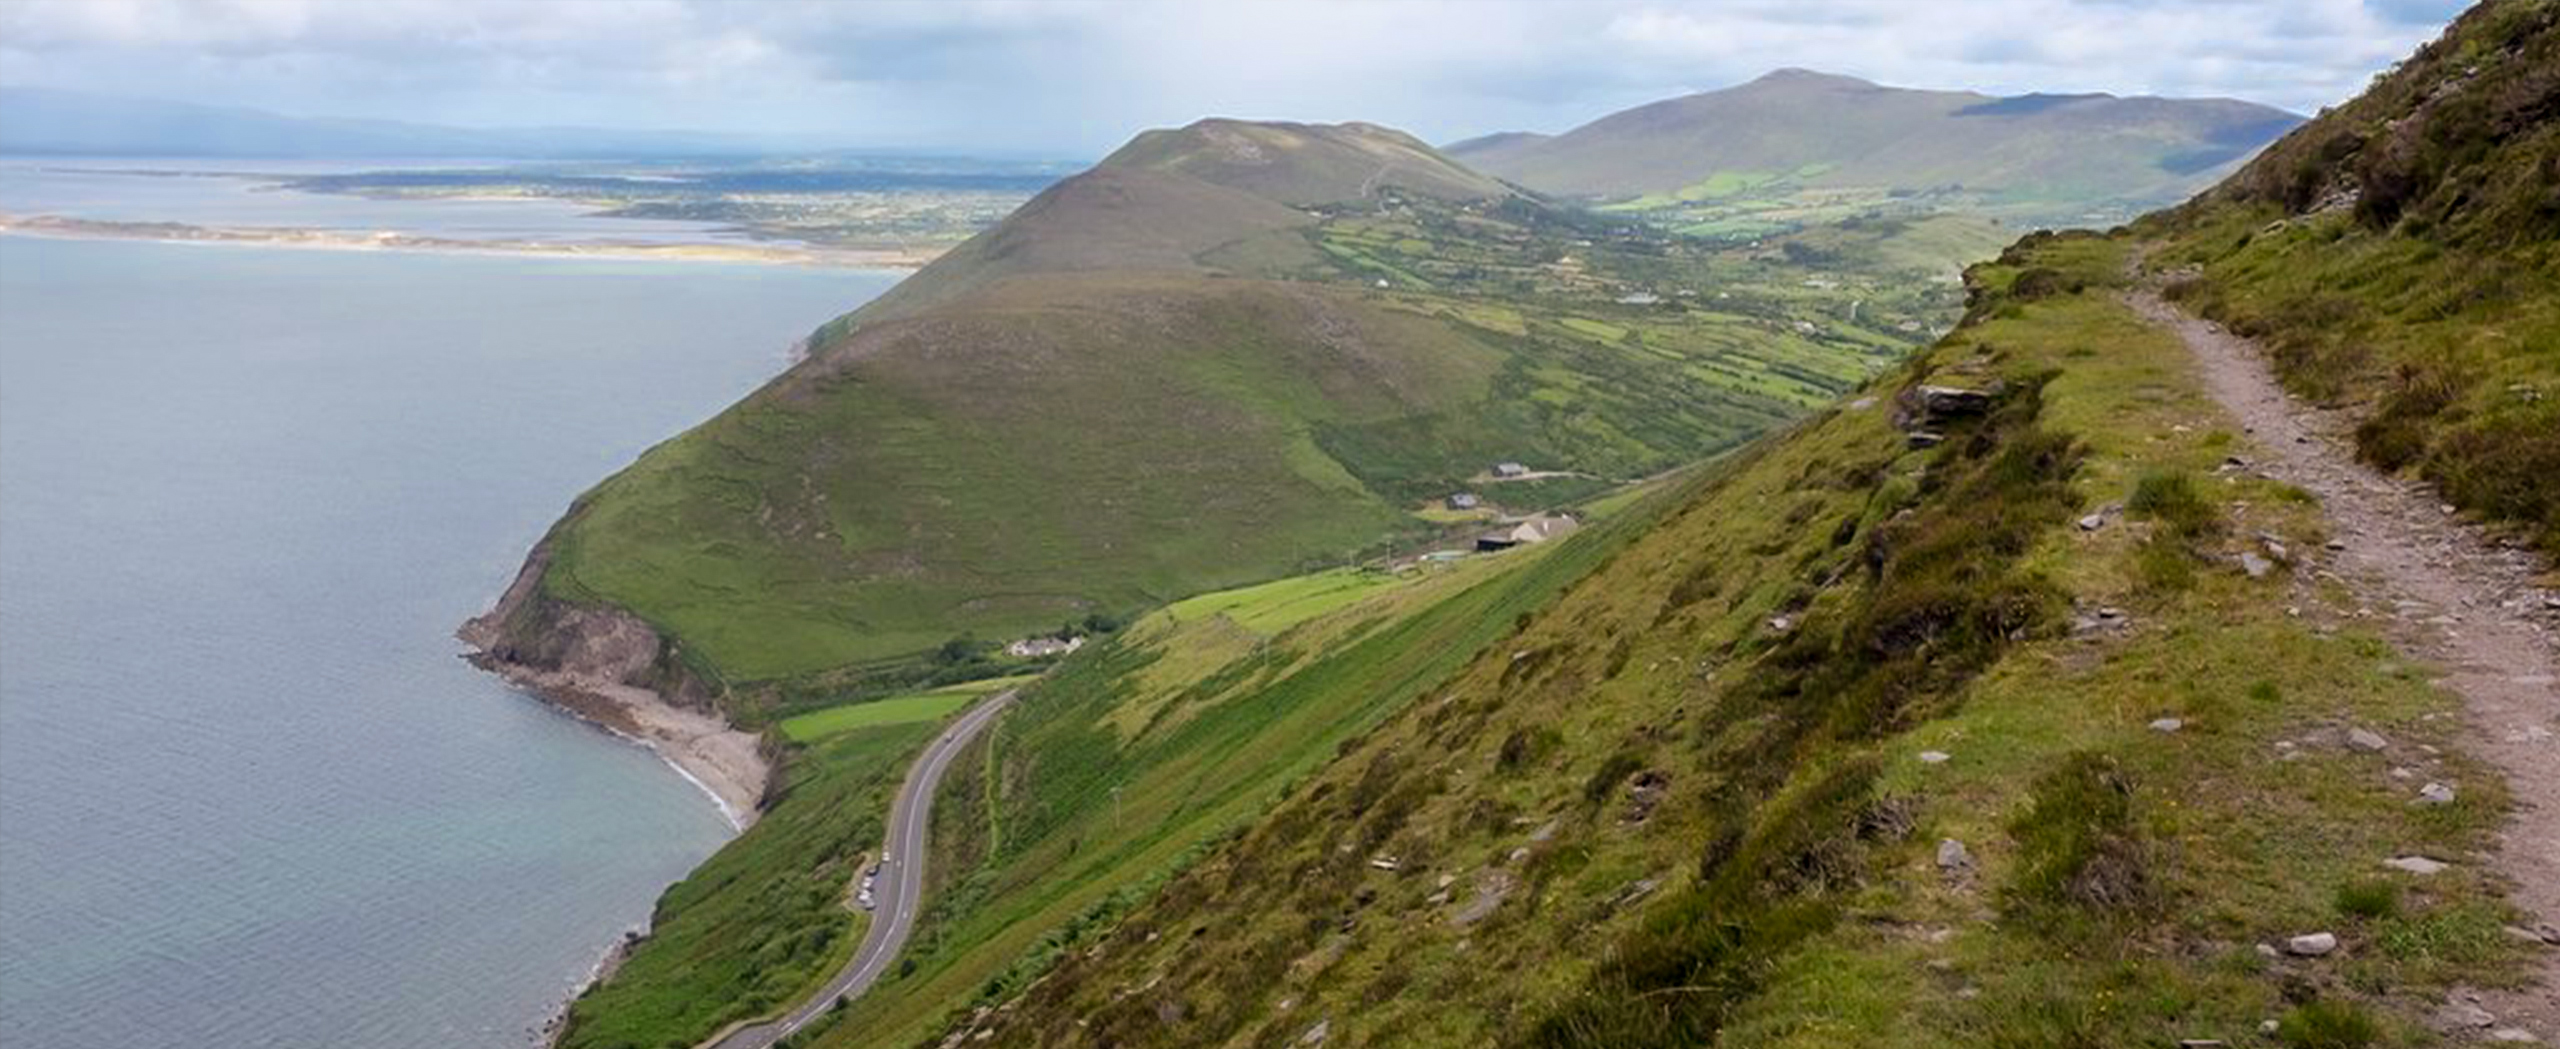 Guided Kerry & Dingle Hiking Tour